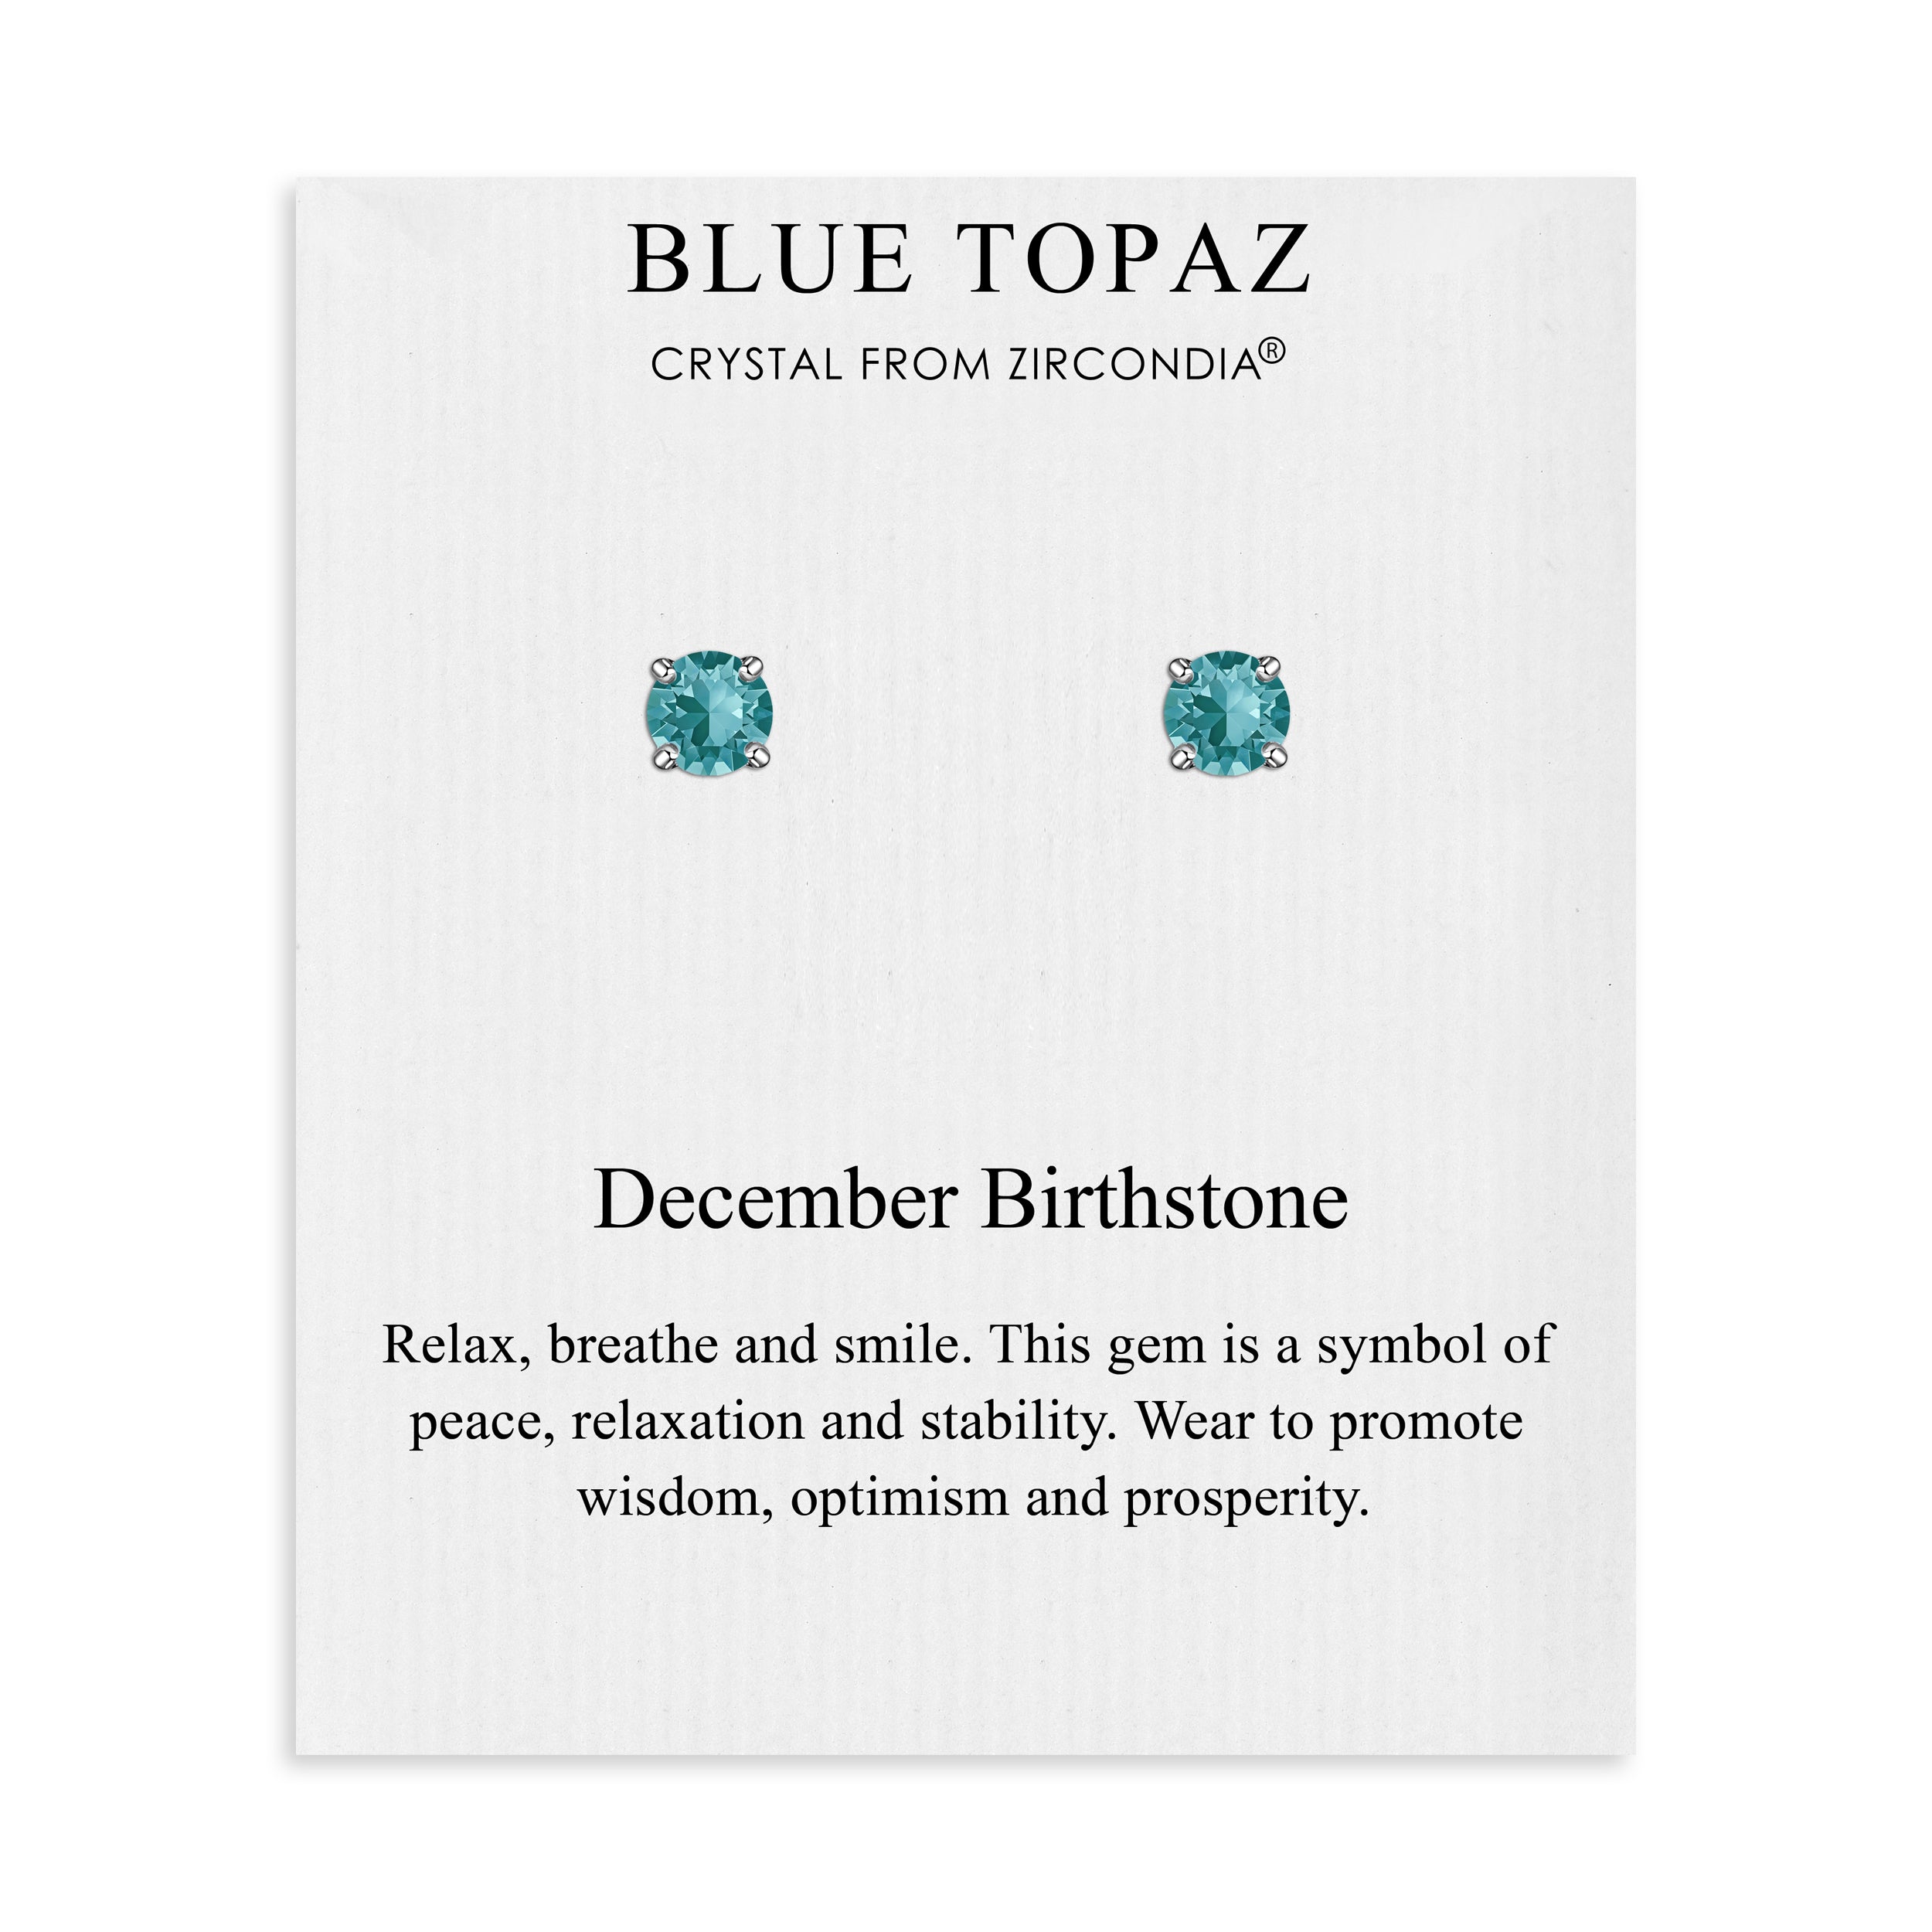 December (Blue Topaz) Birthstone Earrings Created with Zircondia® Crystals